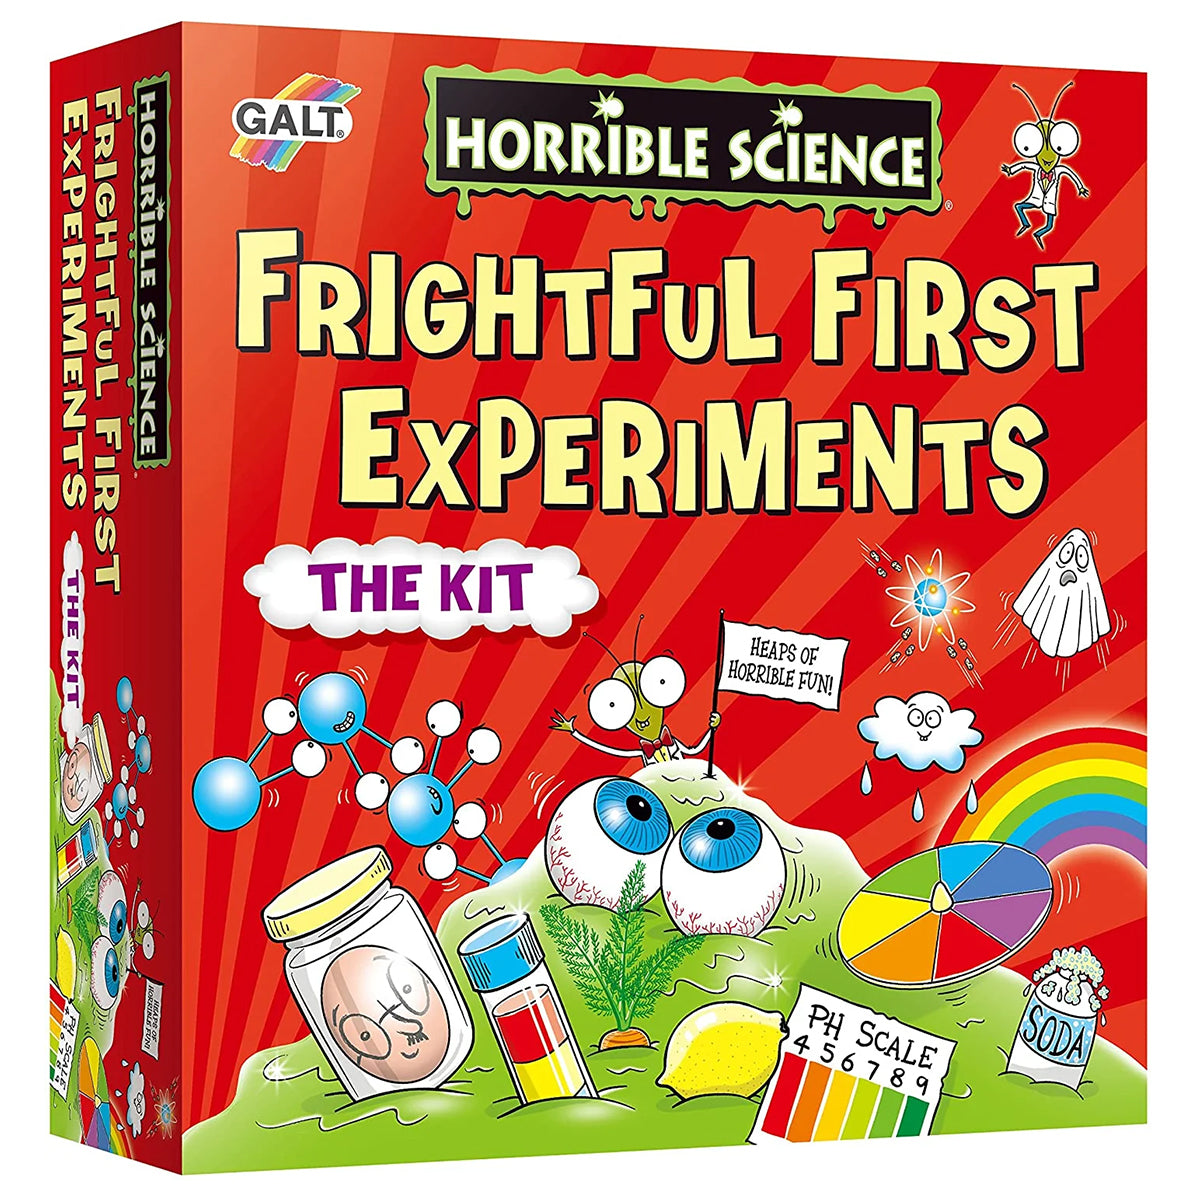 Galt - Frightful First Experiments